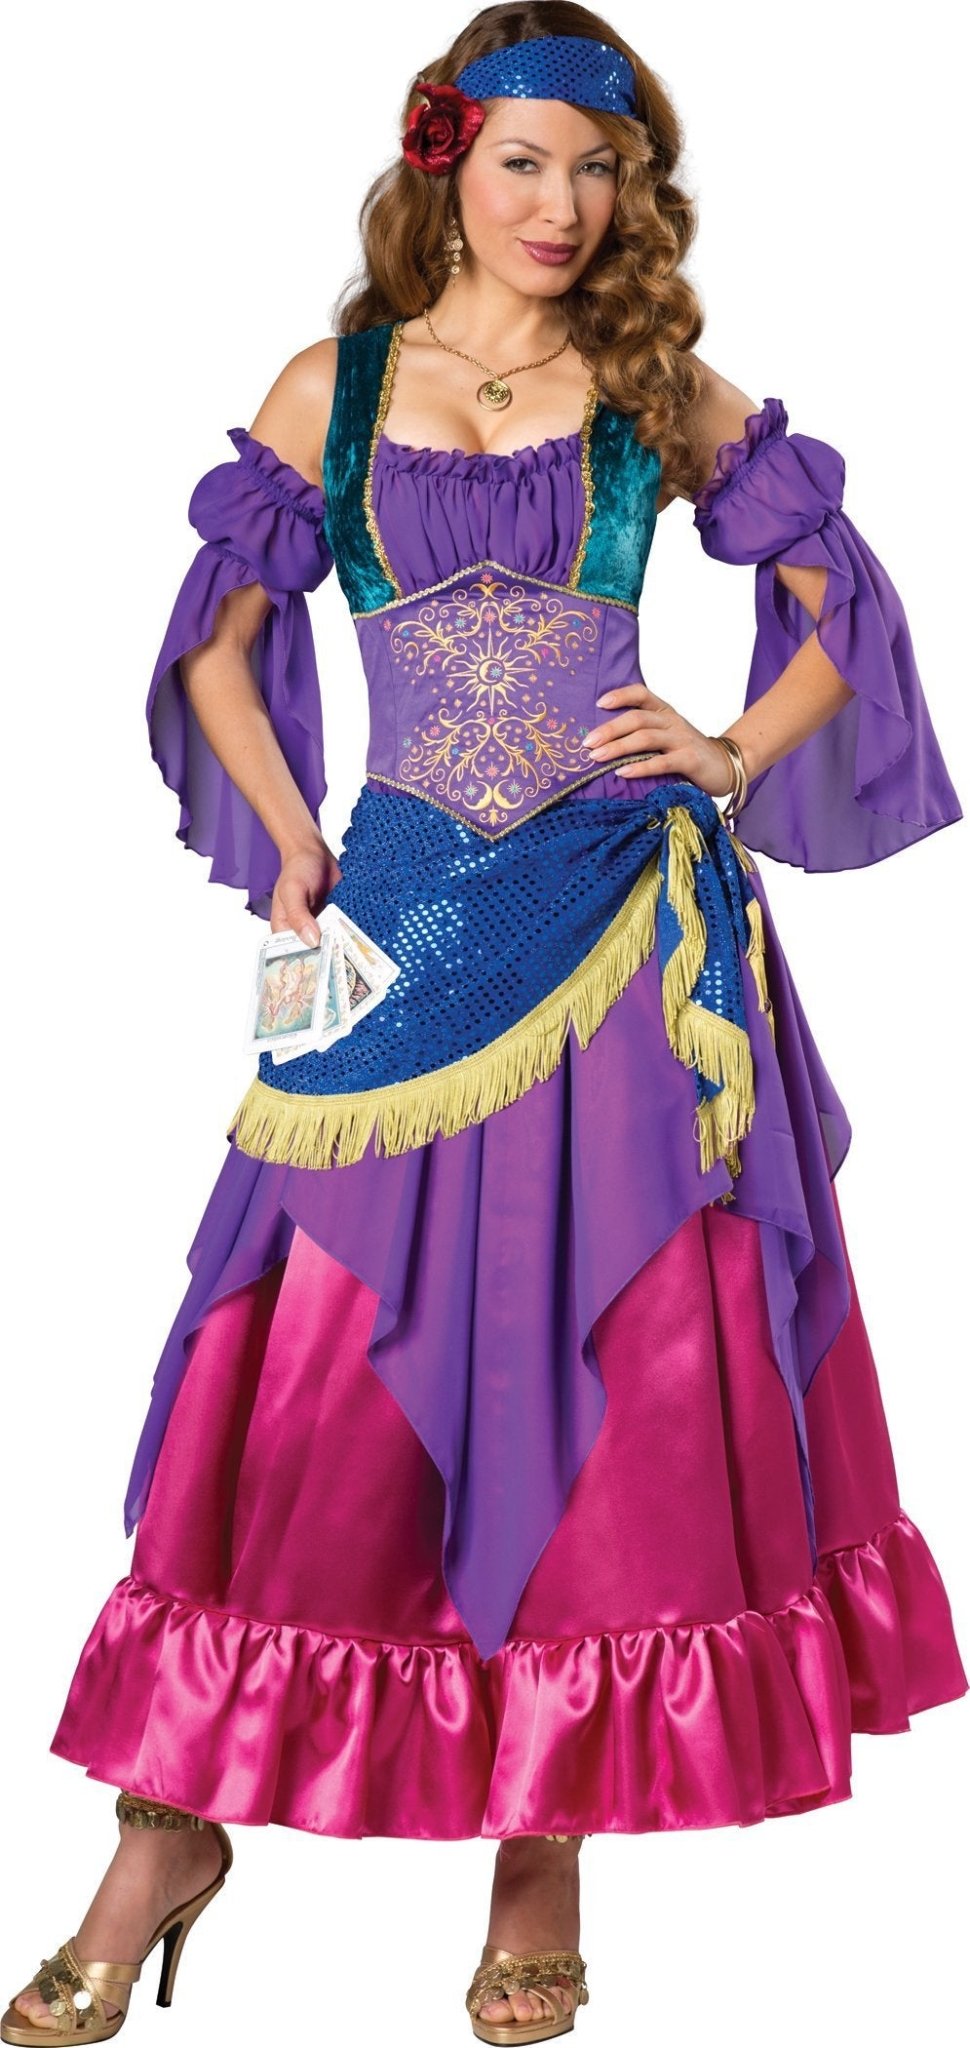 Gypsy Treasure Deluxe Costume - JJ's Party House